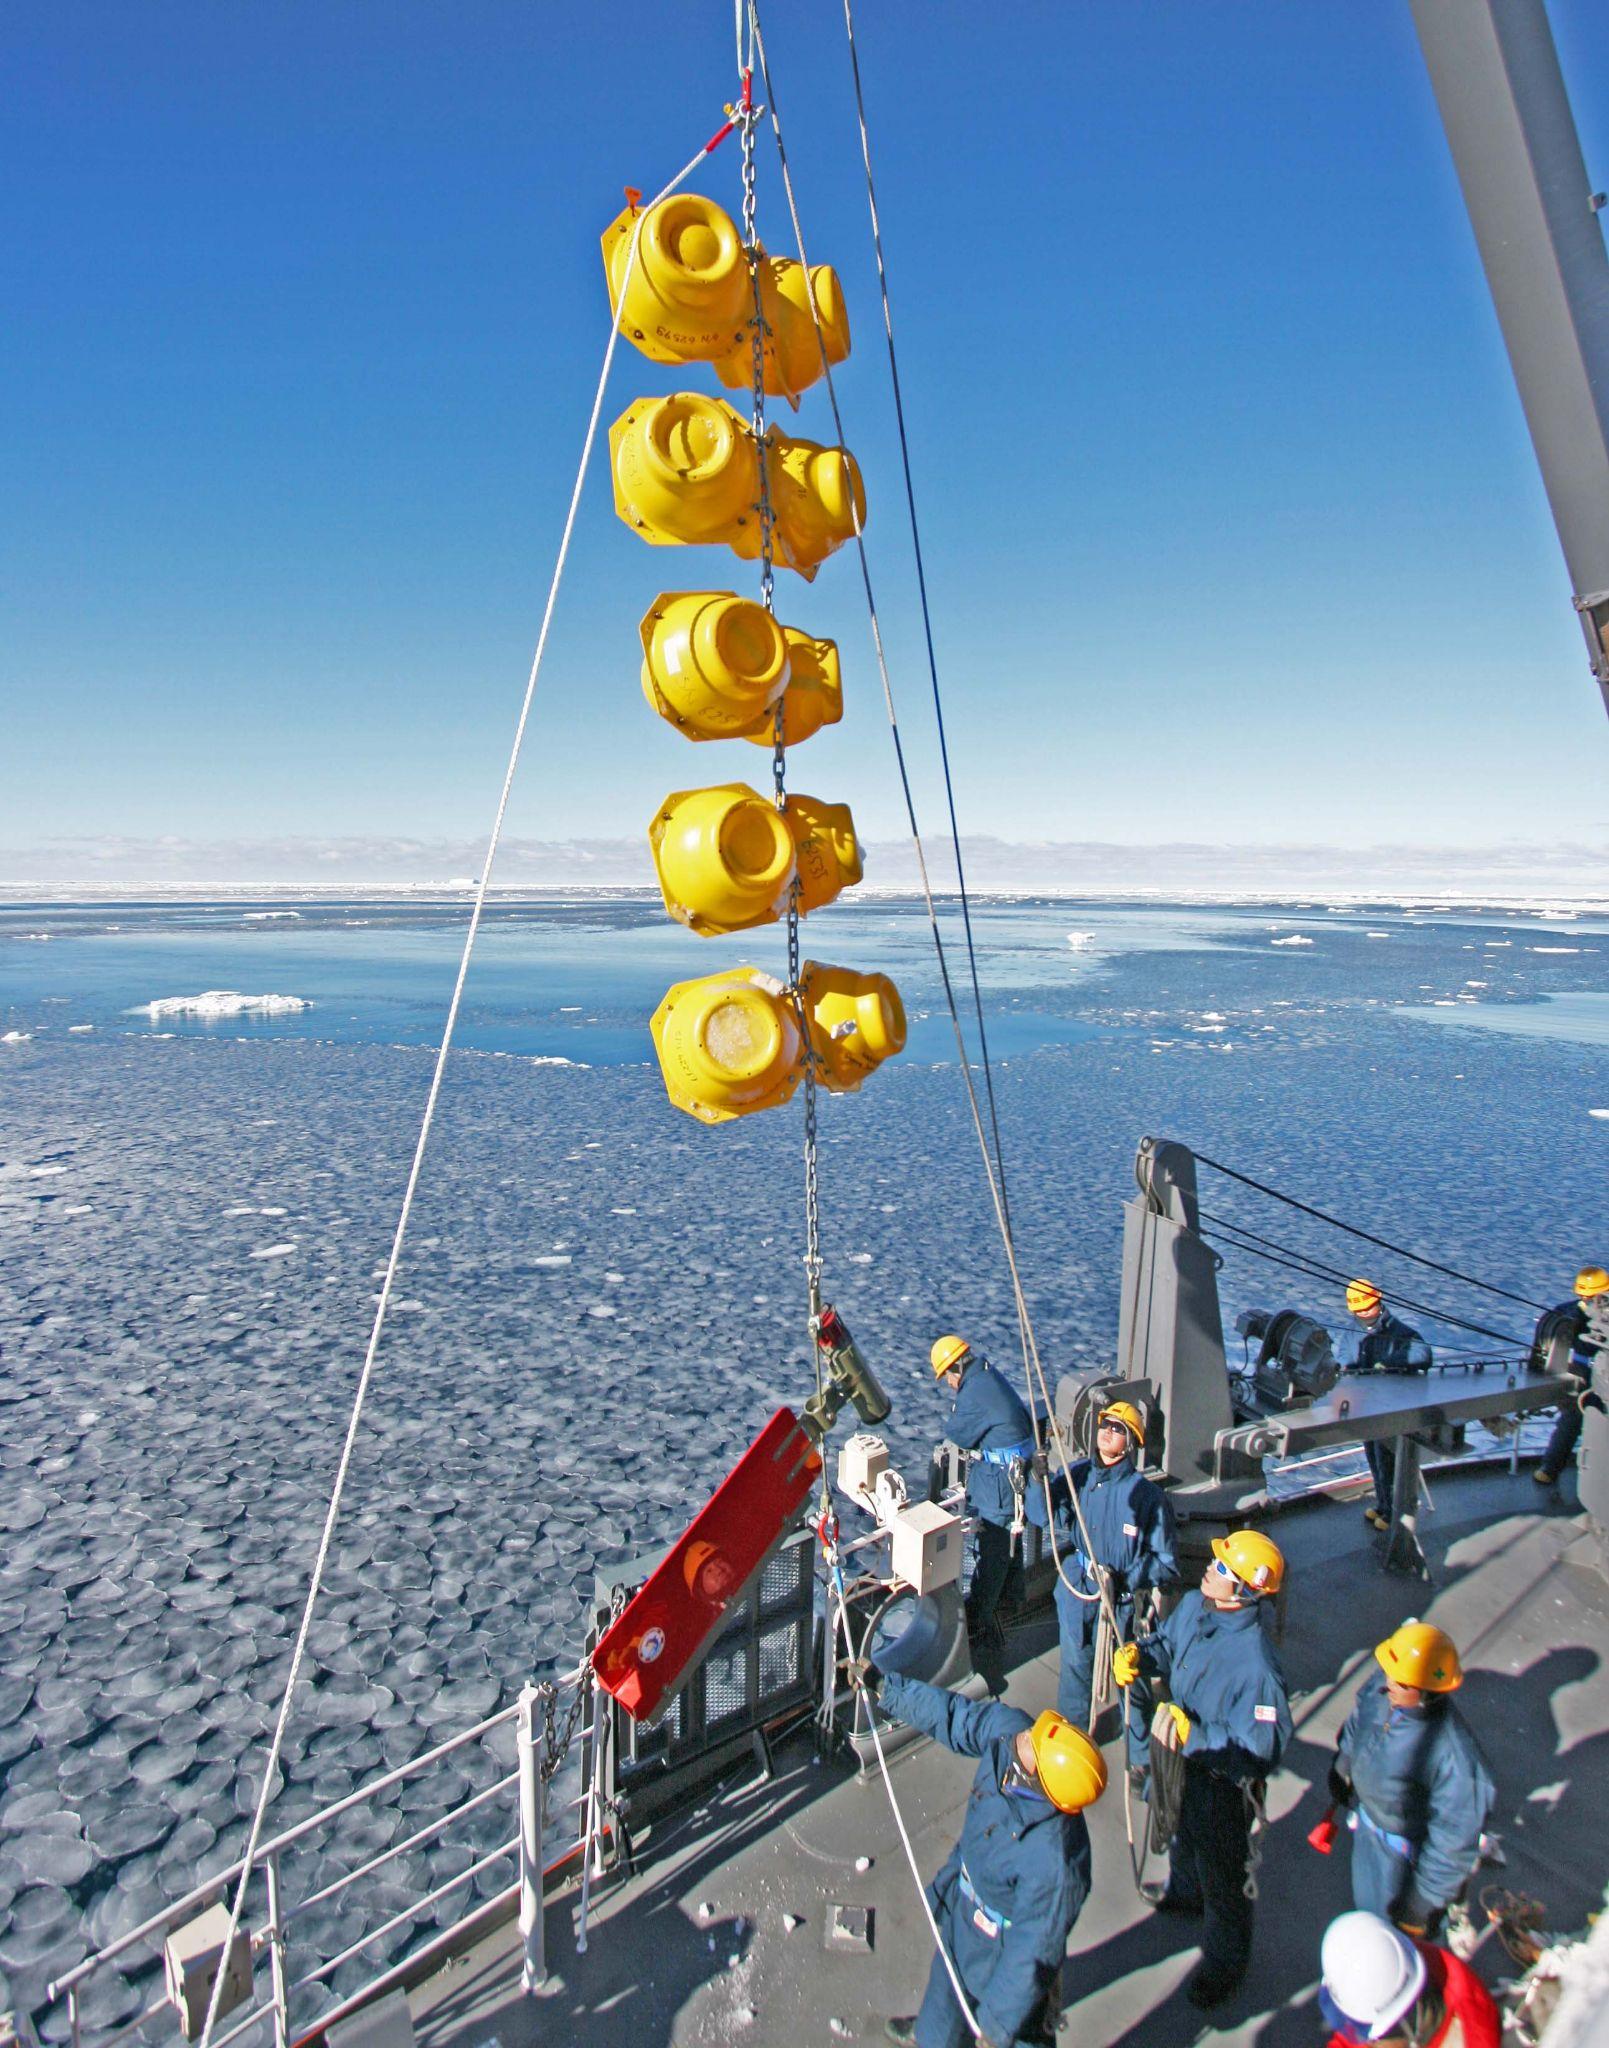 A photo of the installation of observation equipment from the icebreaker "Shirase" during an Antarctic expedition, taken in 2011. Provided by Keigo Asano.